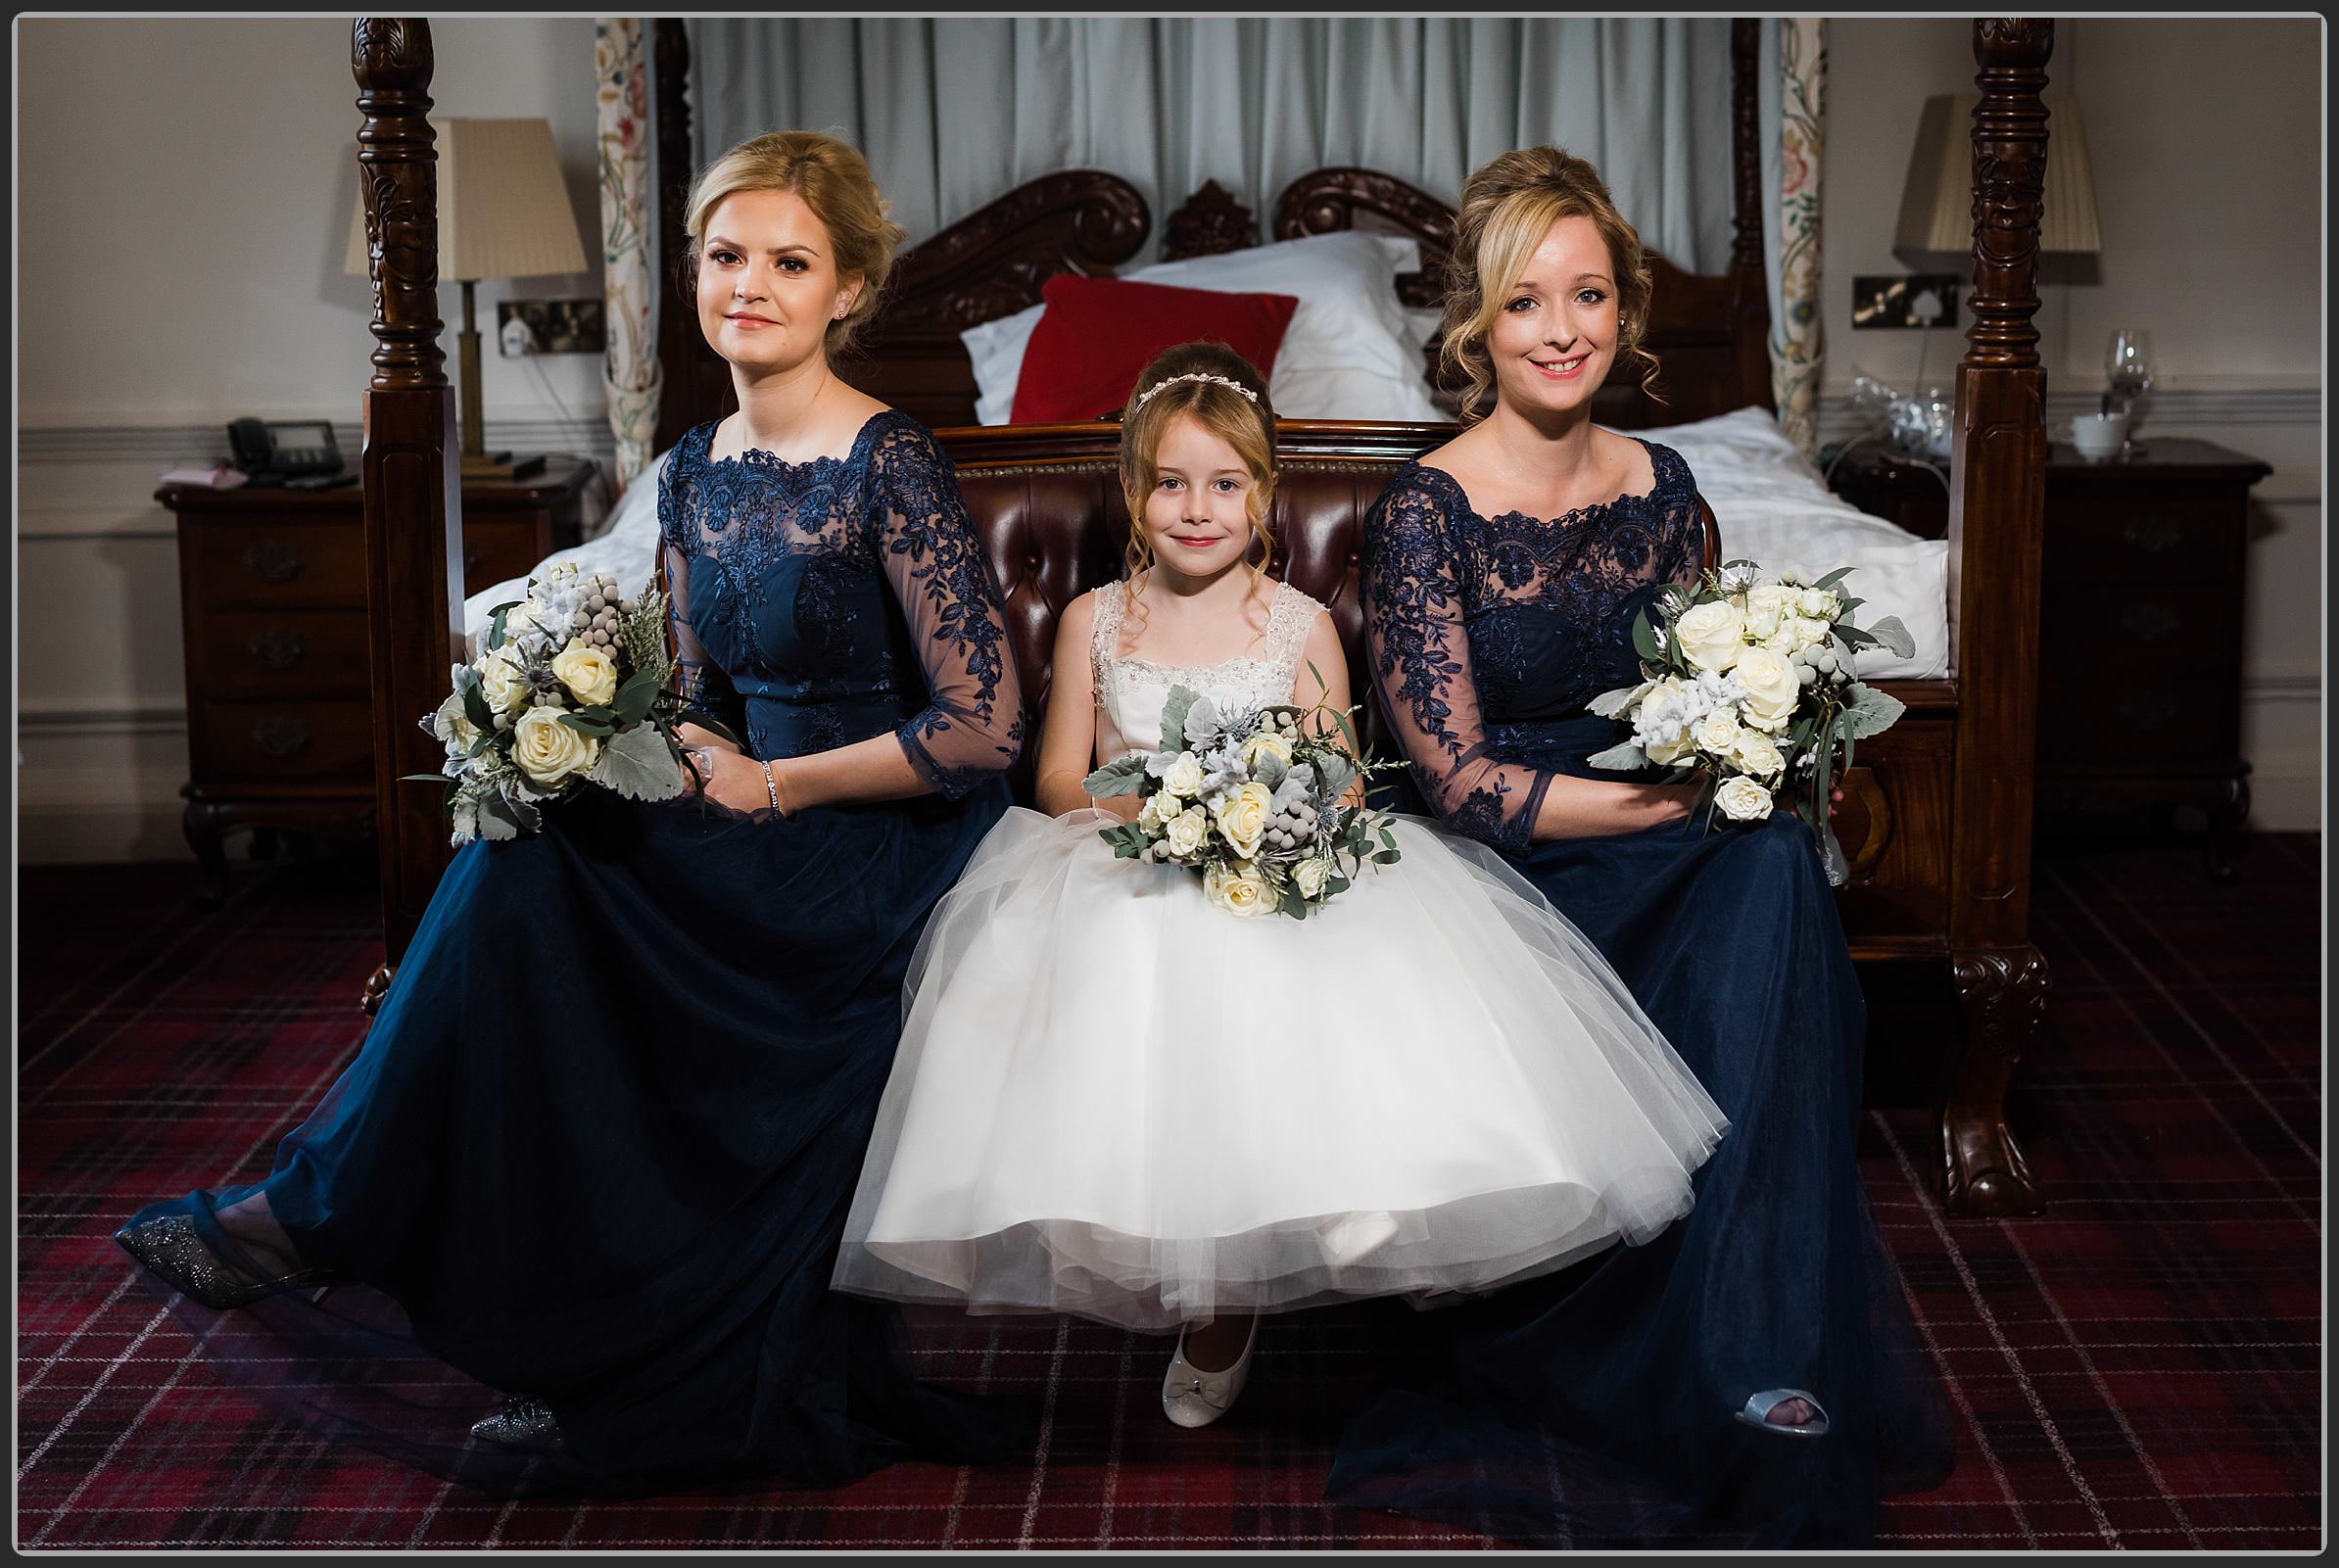 The bridesmaids and flower girl together